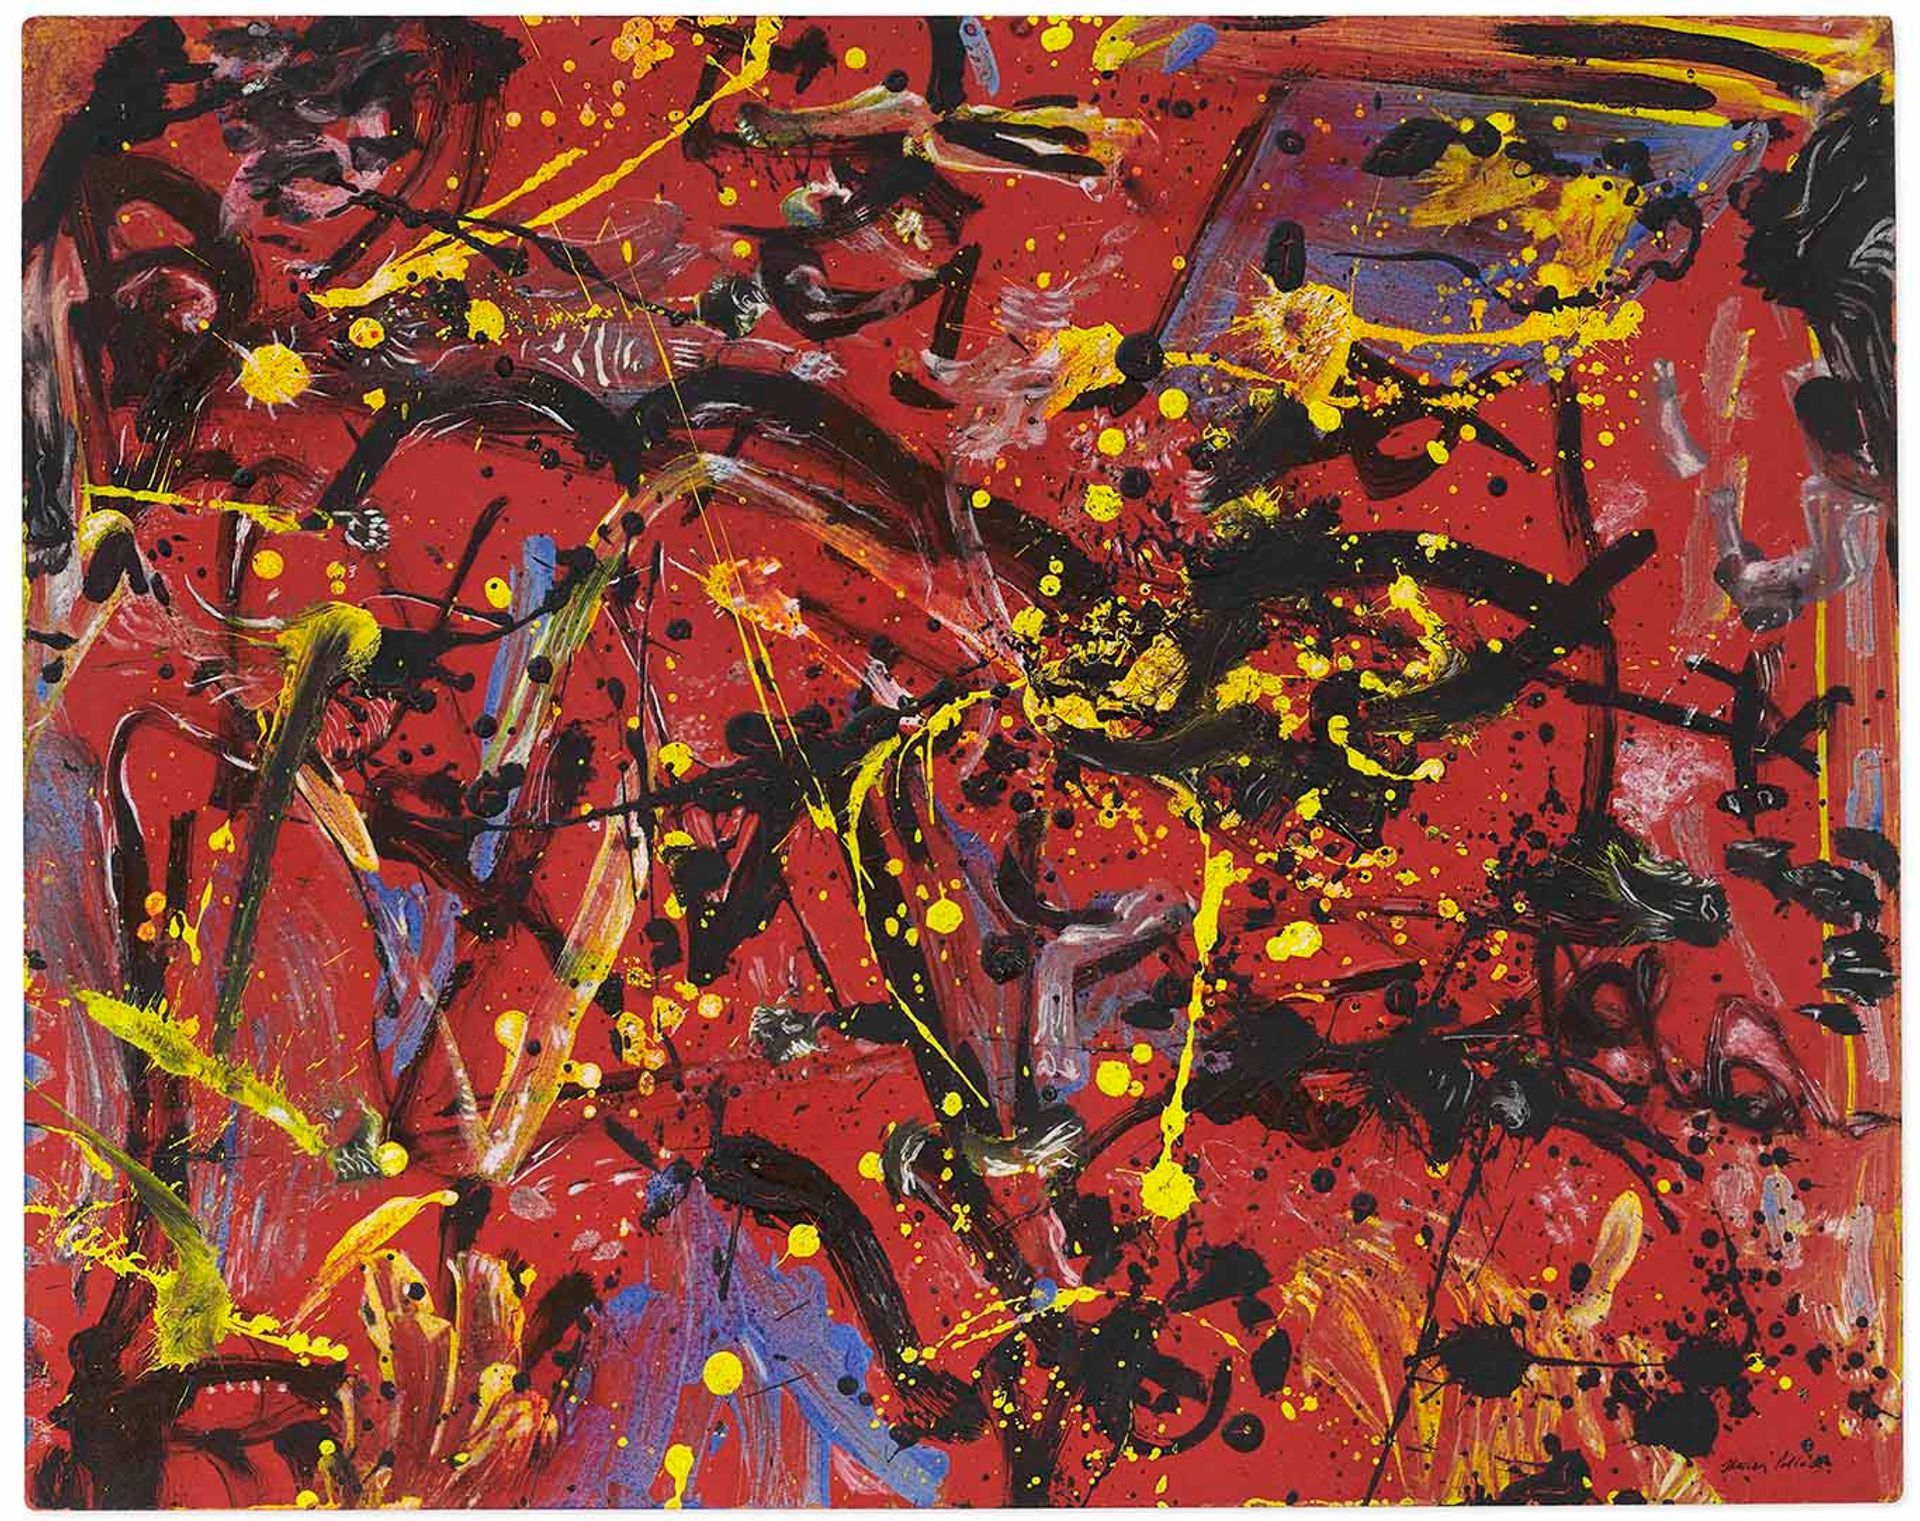 Jackson Pollock, Red Composition (1946), which sold at Christie's for $12m Christie's Images Ltd. 2020